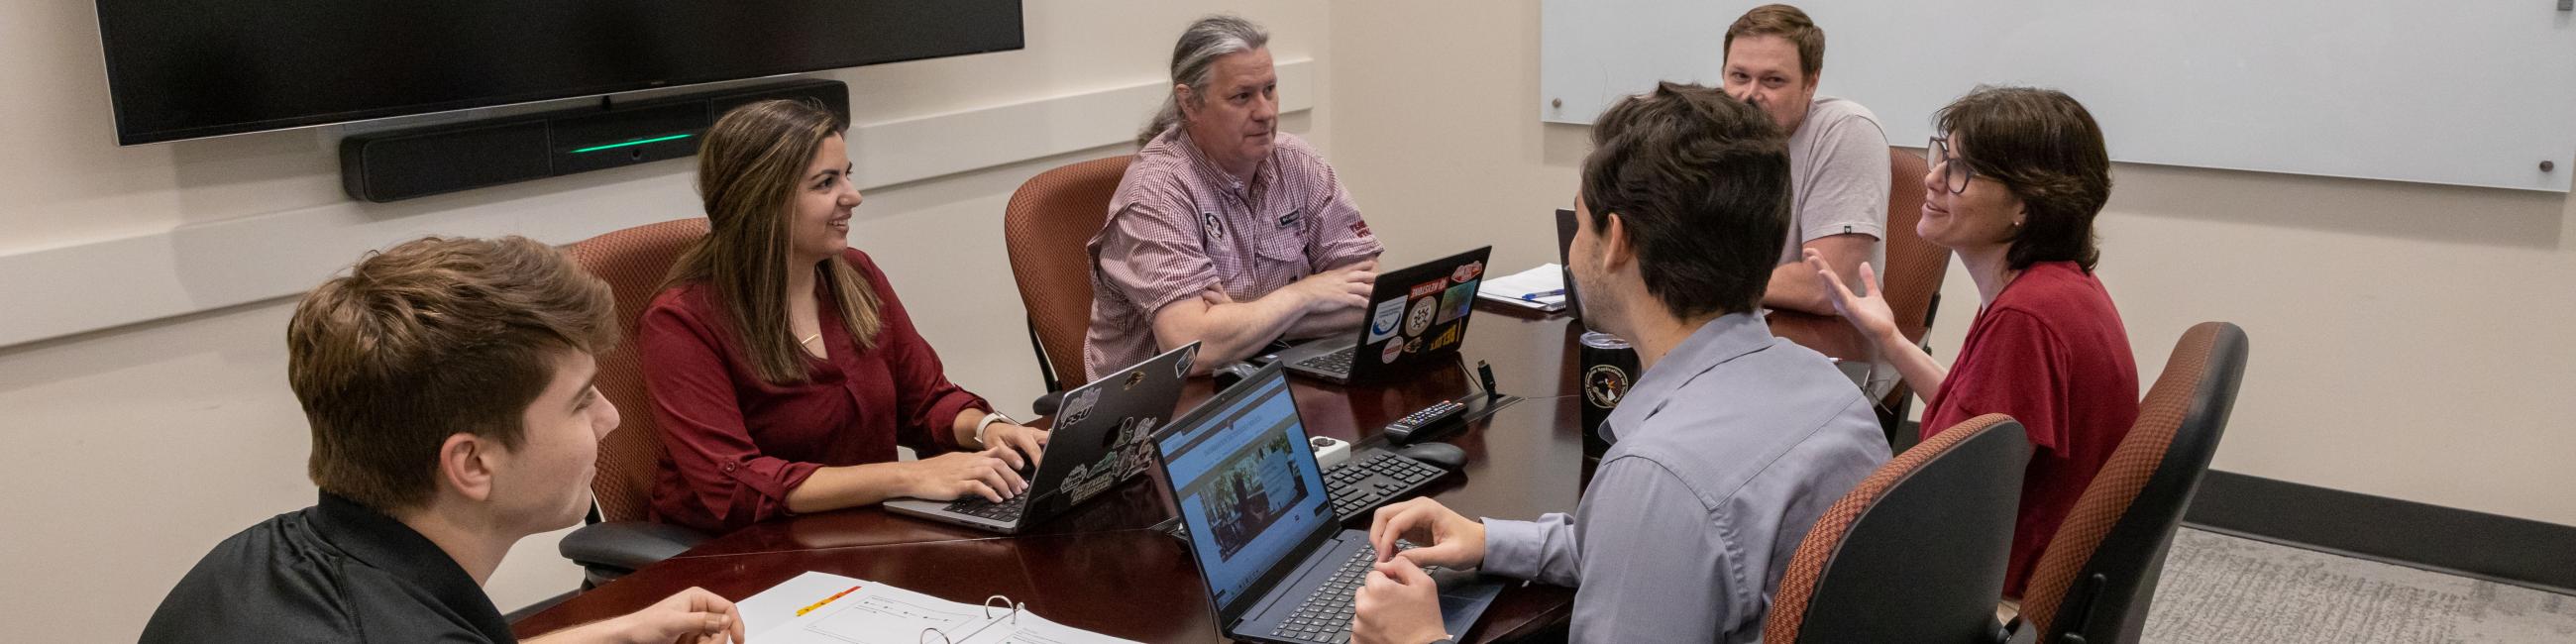 Six employees working together on their laptops in a conference room.